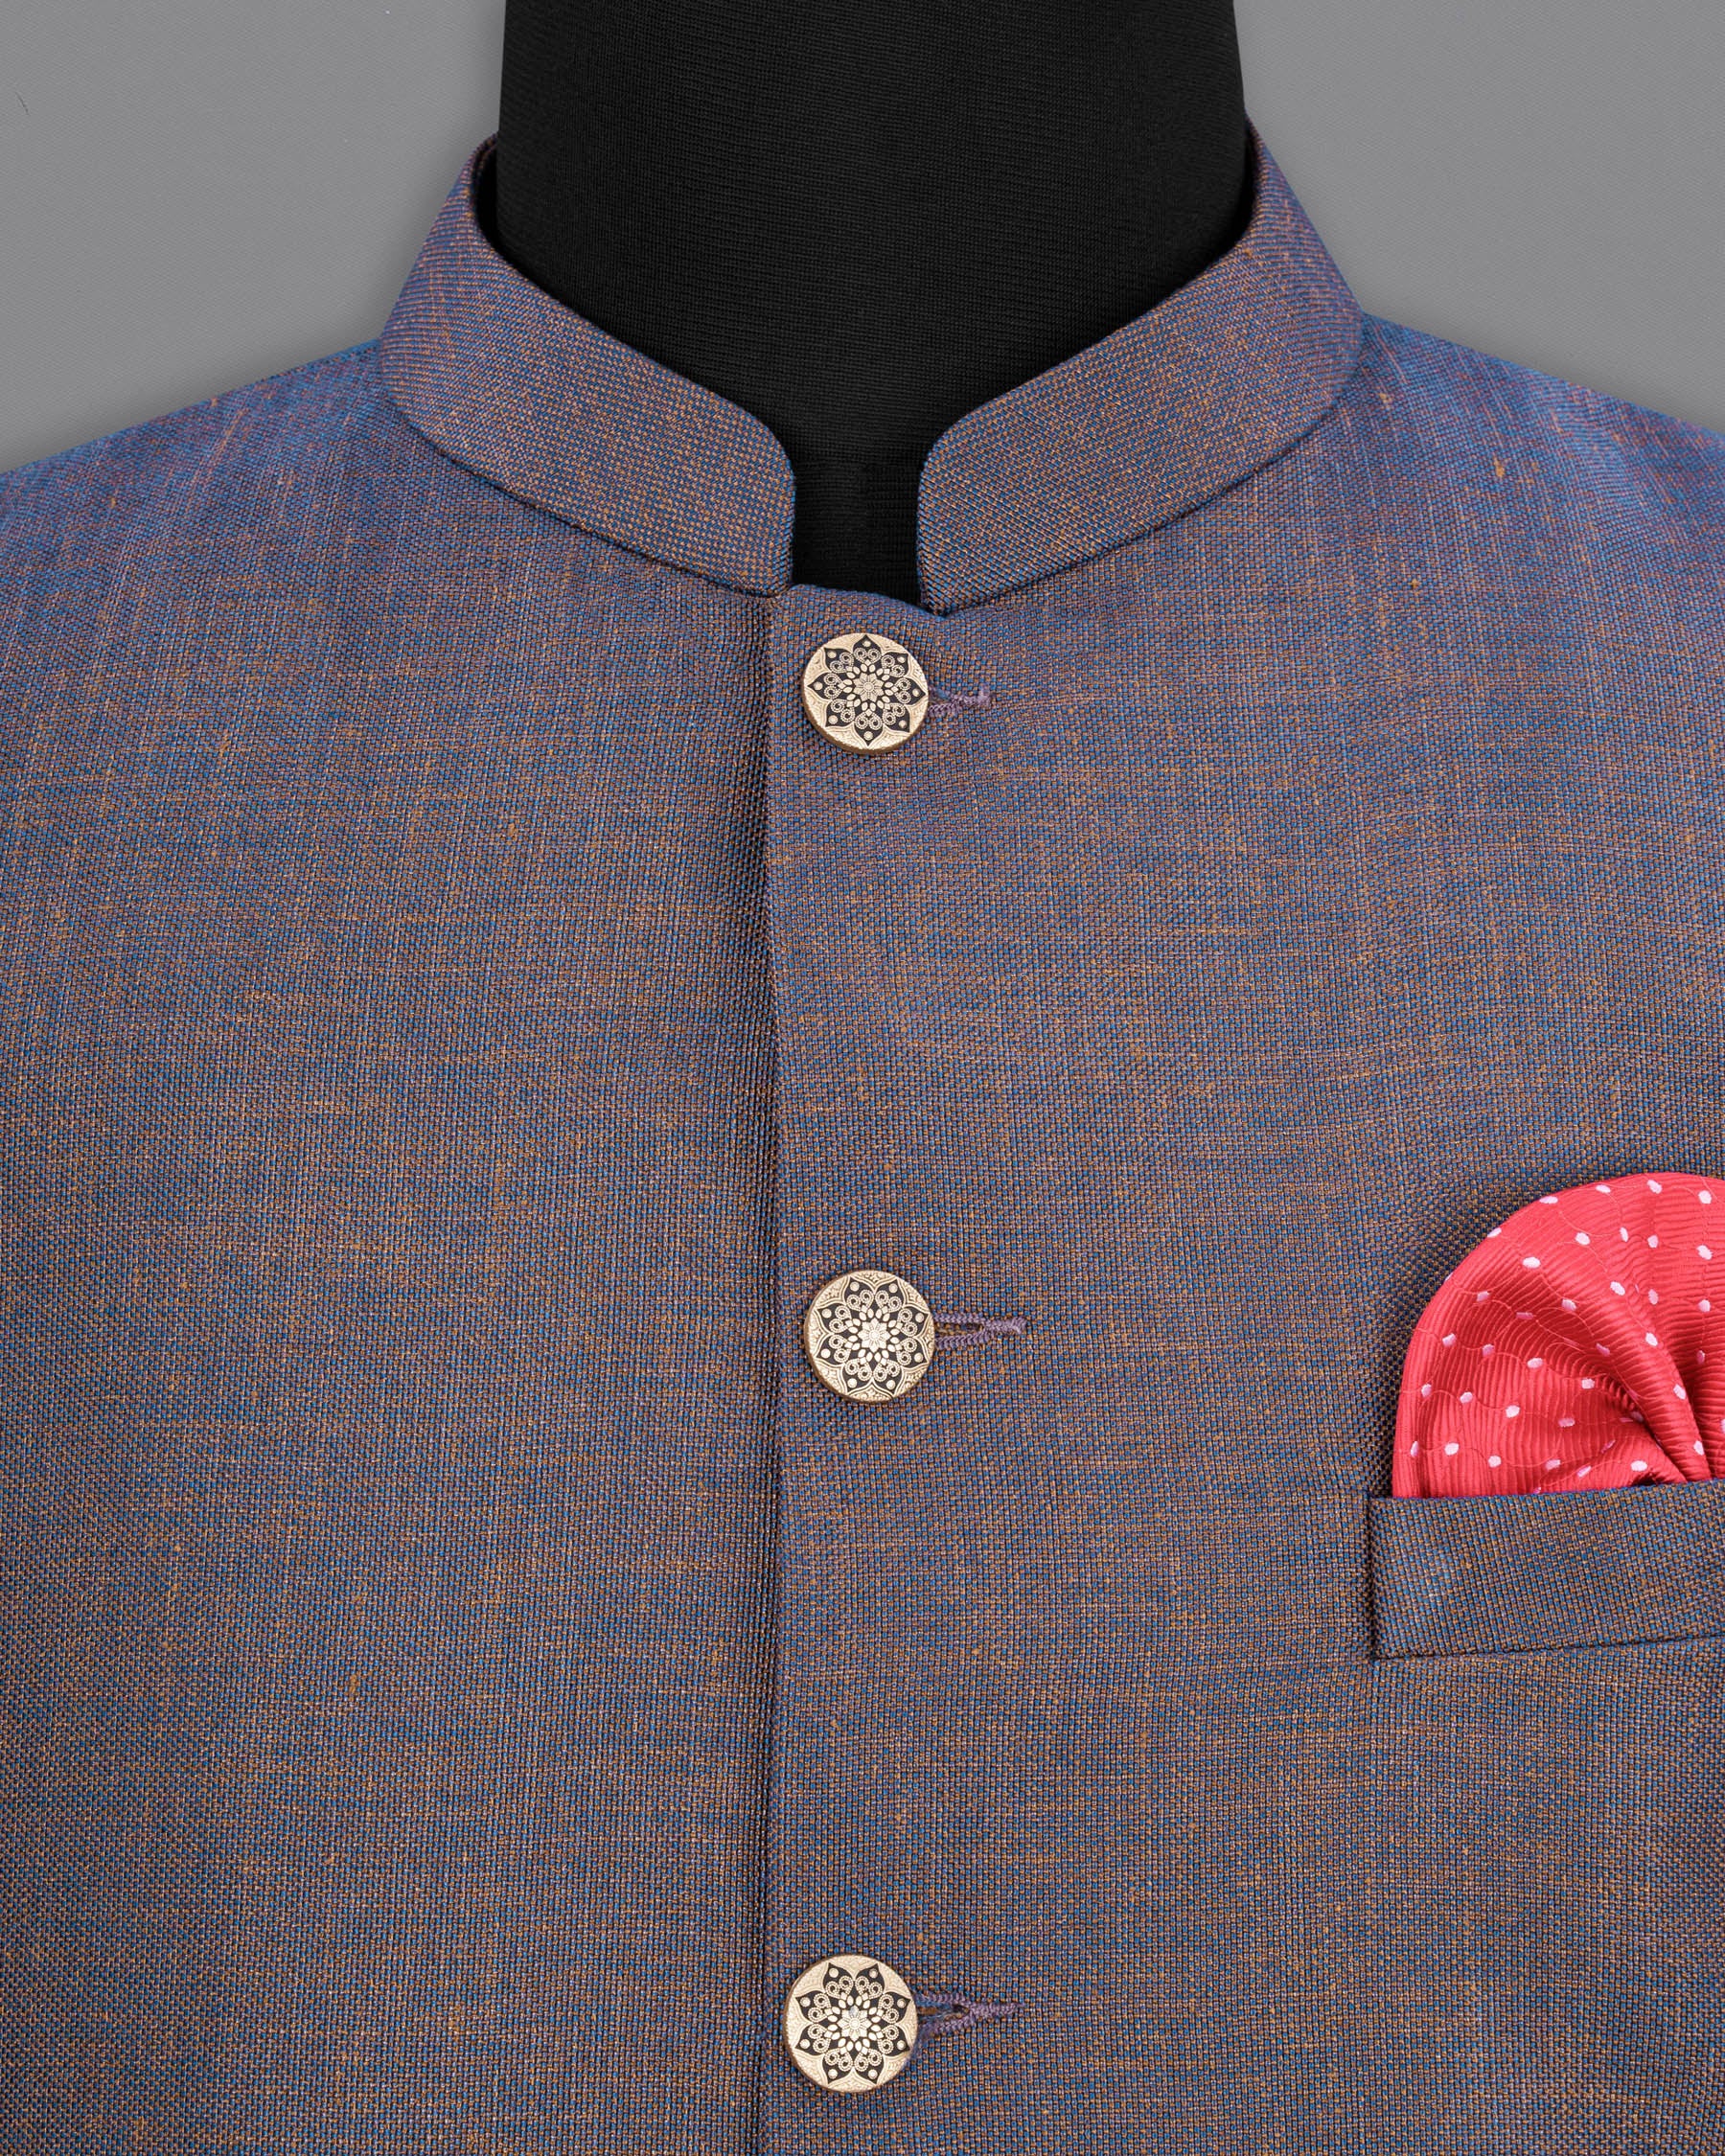 Brownish with Downriver Blue Two Tone Textured Nehru Jacket WC1642-36, WC1642-38, WC1642-40, WC1642-42, WC1642-44, WC1642-46, WC1642-48, WC1642-50, WC1642-52, WC1642-54, WC1642-56, WC1642-58, WC1642-60